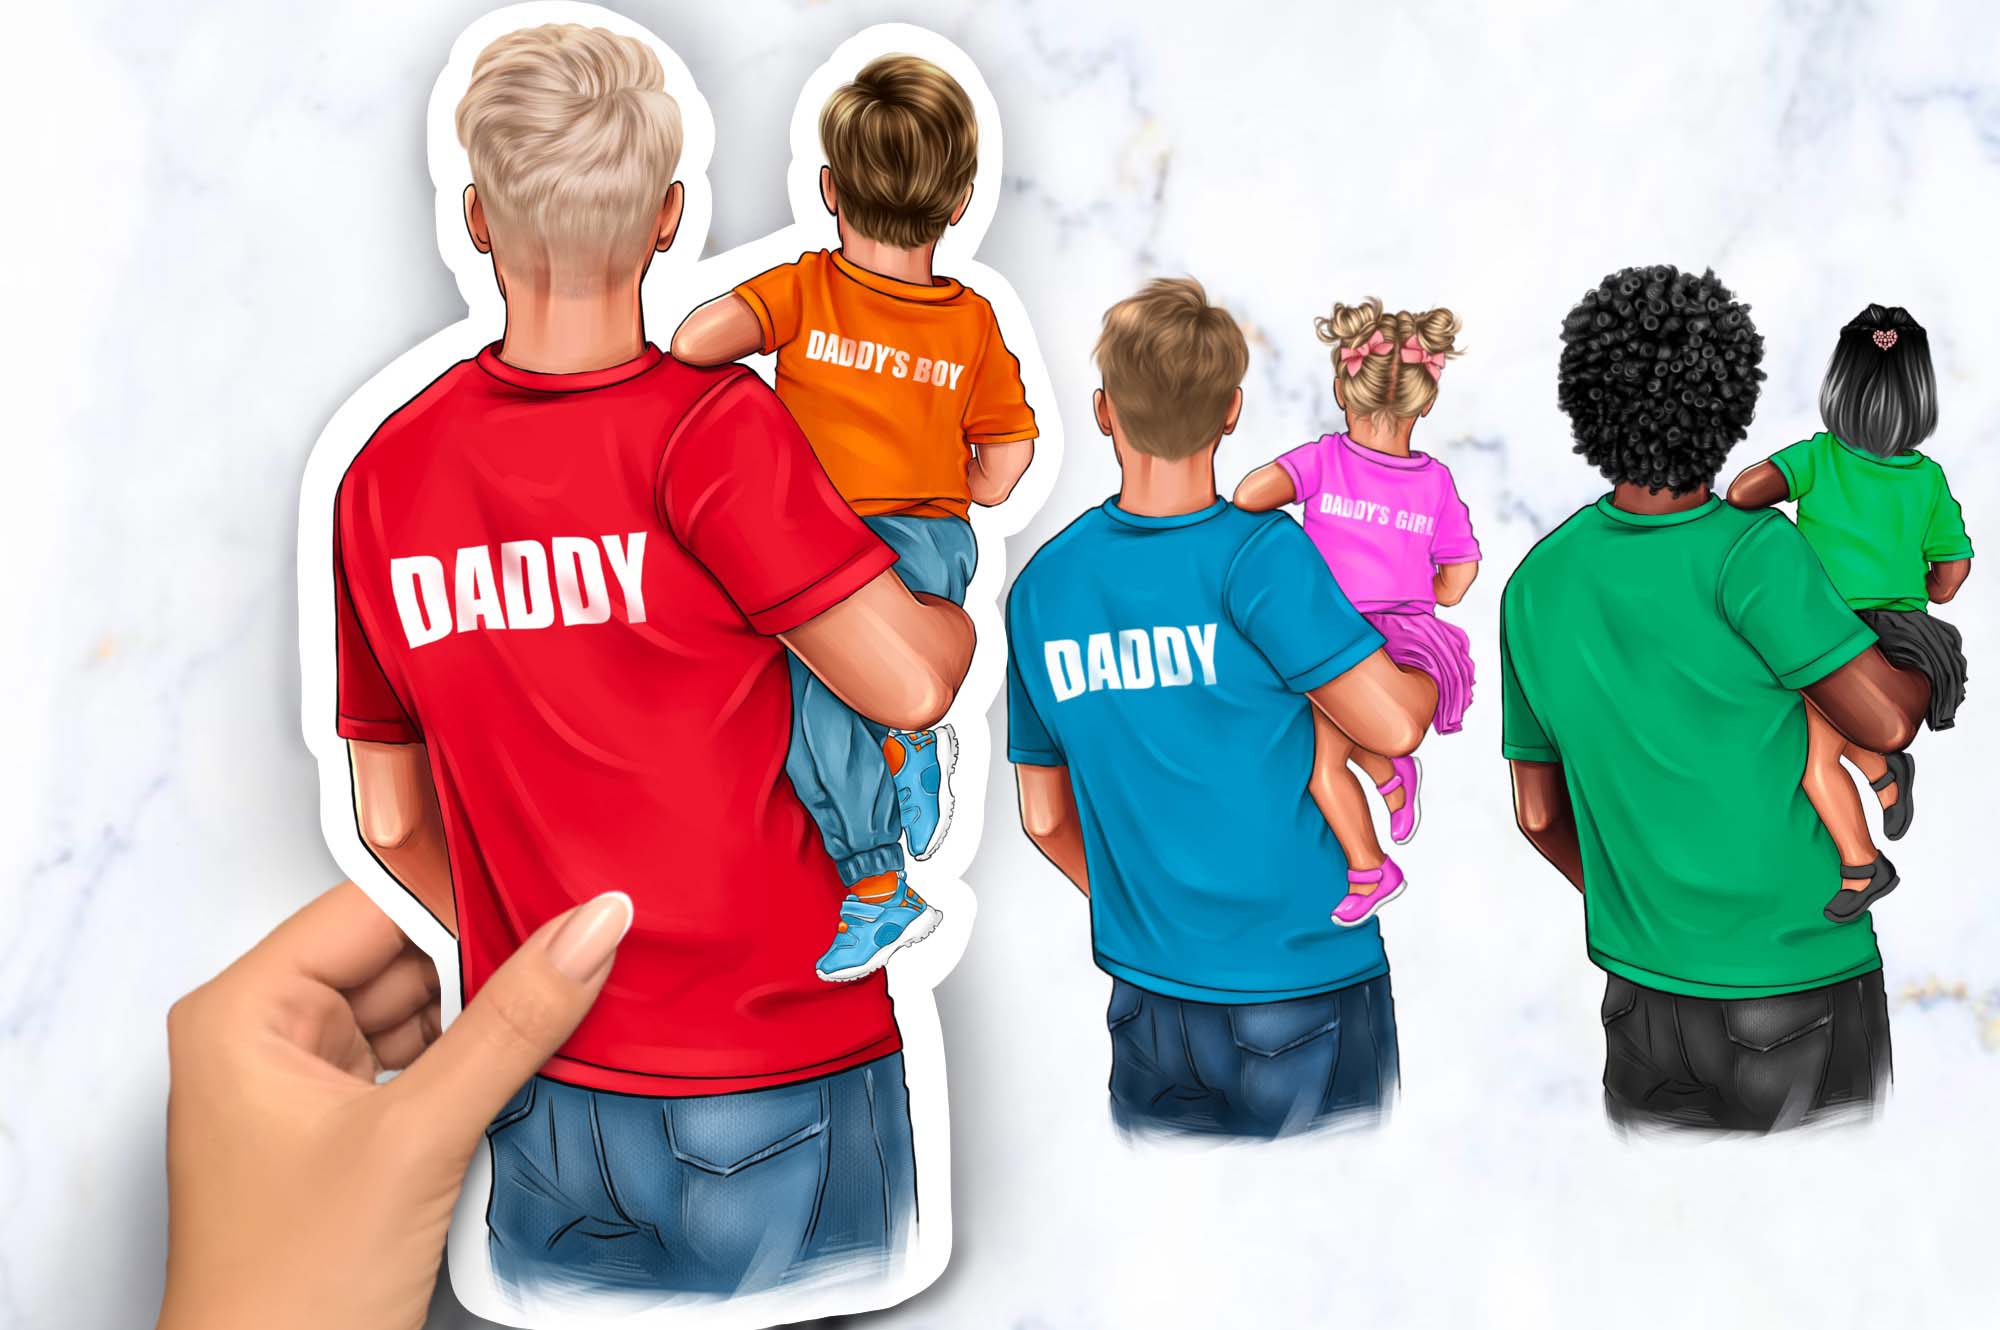 Family Clipart Dad With Kids Facebook Image.